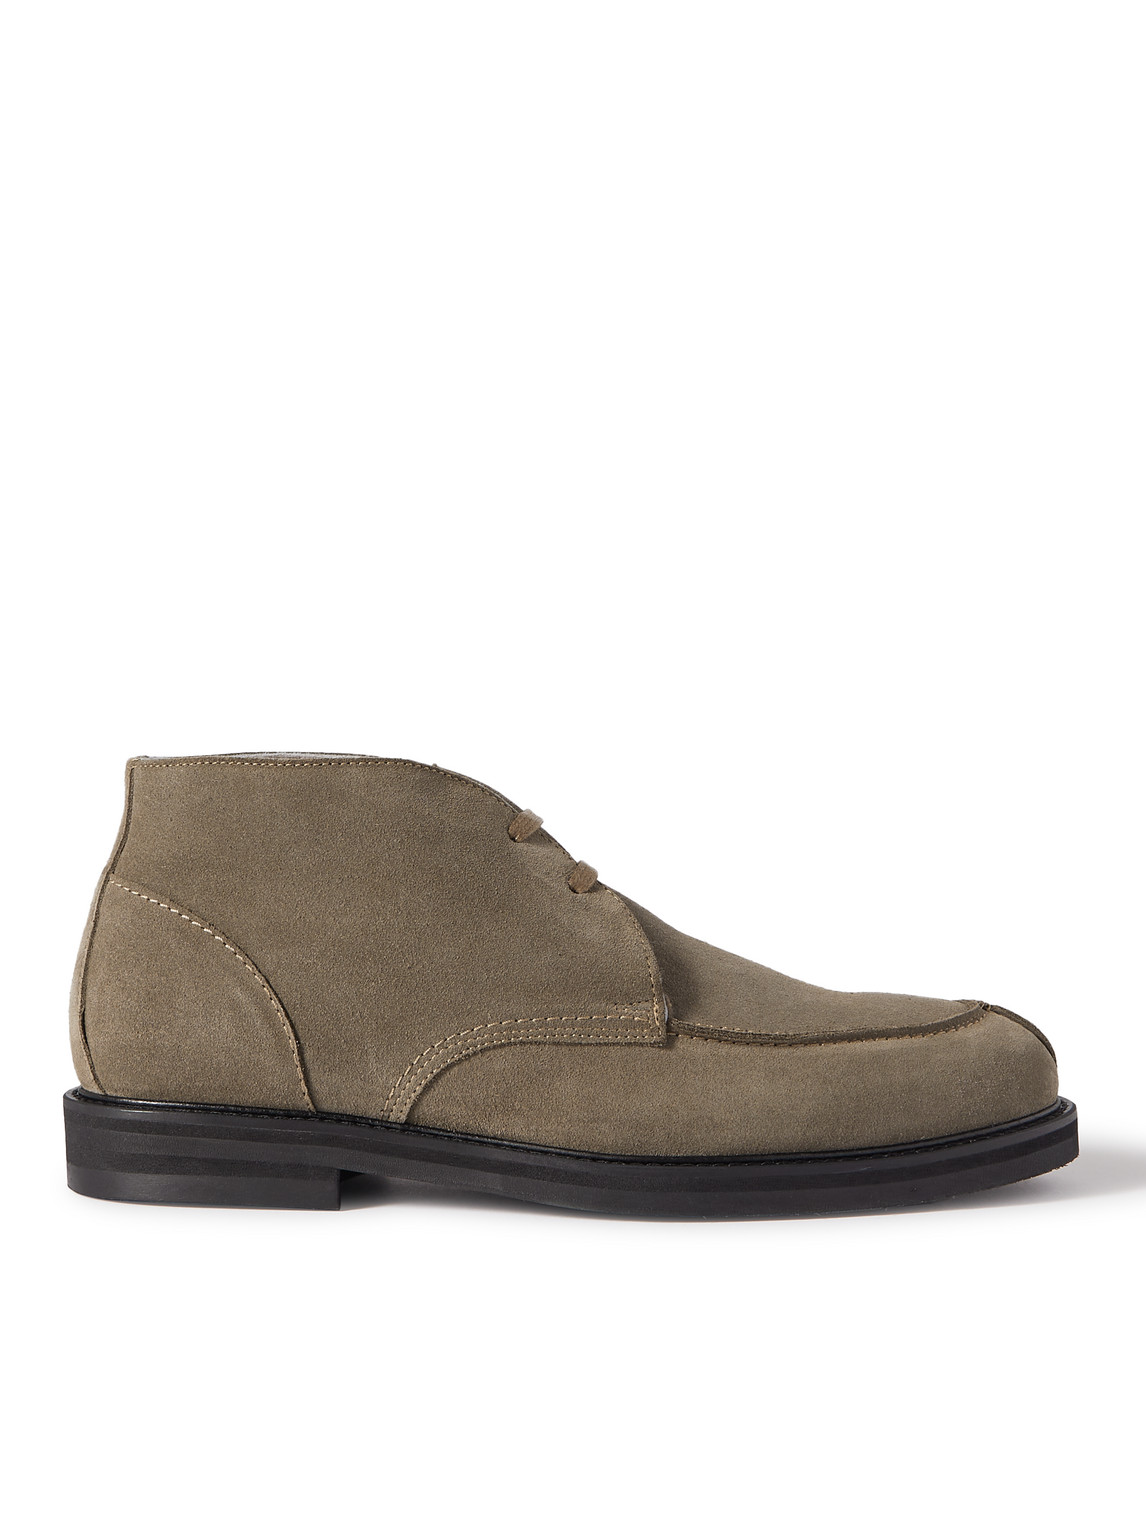 Andrew Split-Toe Shearling-Lined Waxed-Suede Chukka Boots